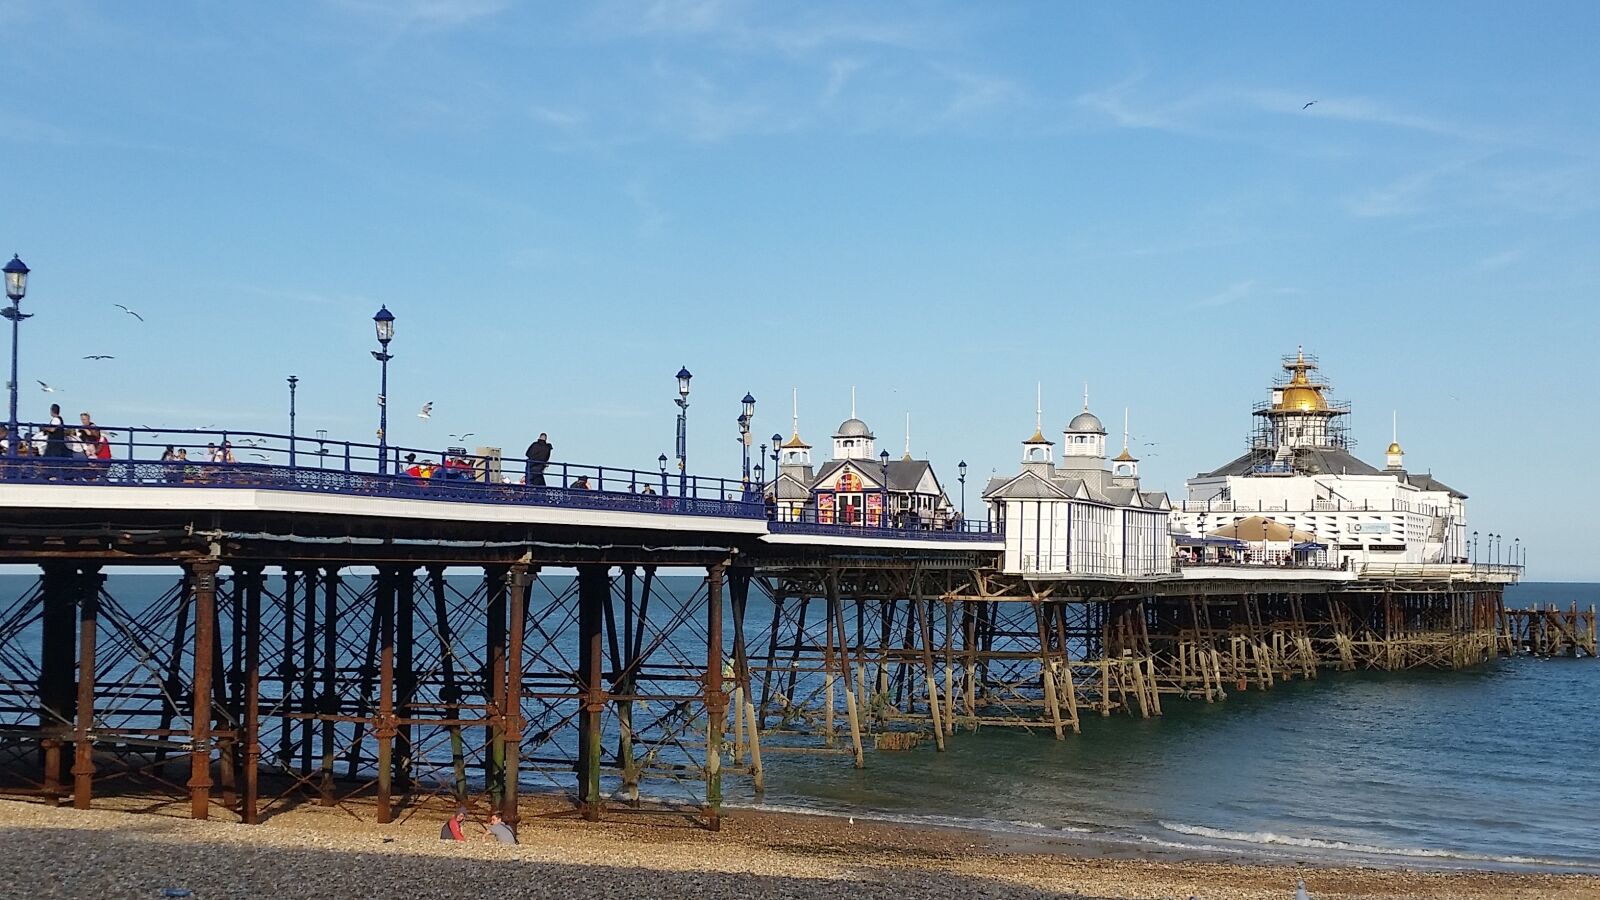 Samsung Galaxy S5 sample photo. Eastbourne, seaside, pier photography